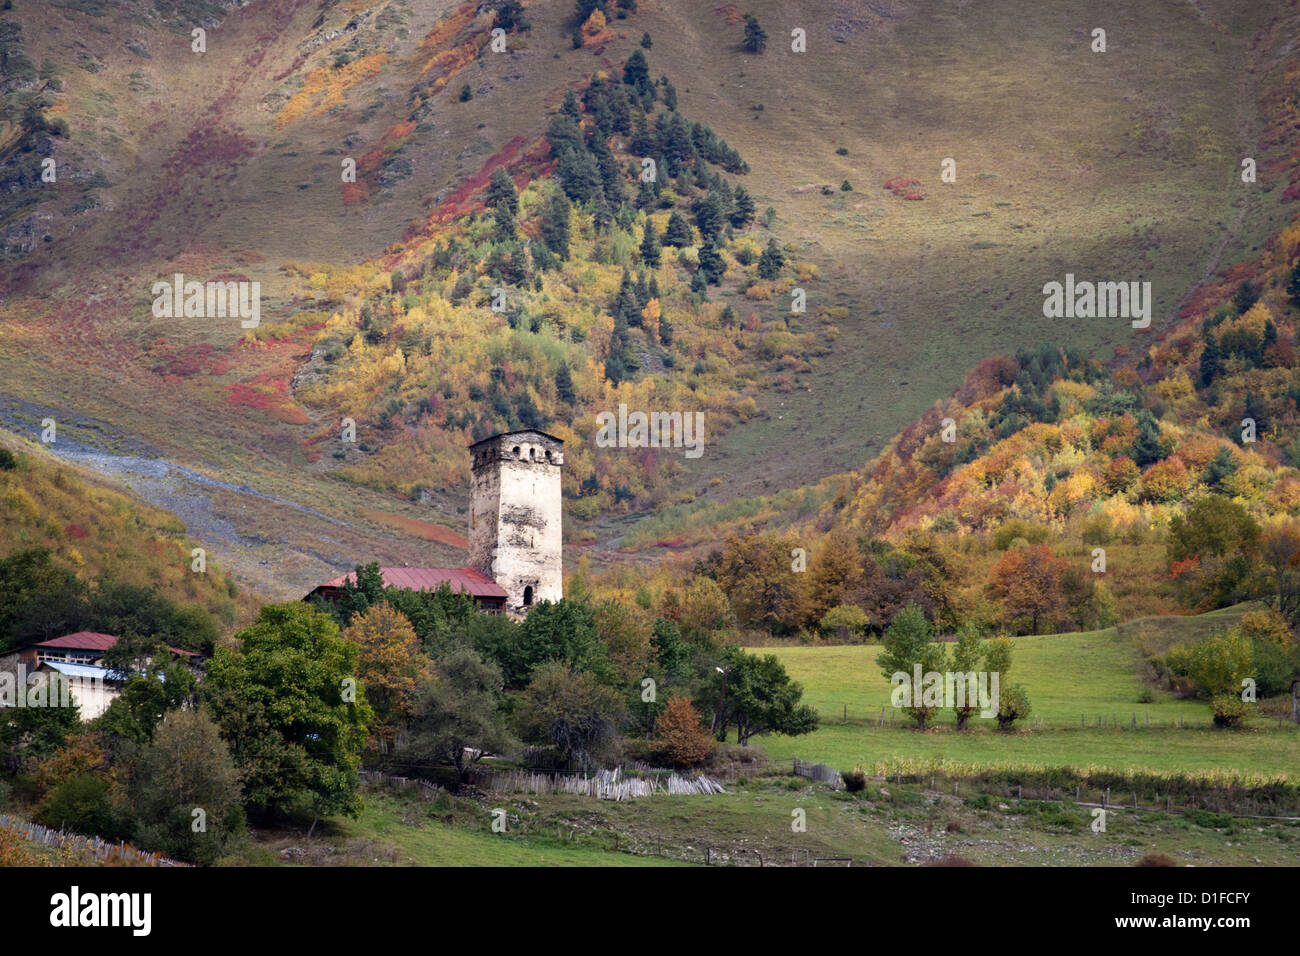 Typical Svaneti watchtower on the southern slopes of the Greater Caucasus, Georgia Stock Photo